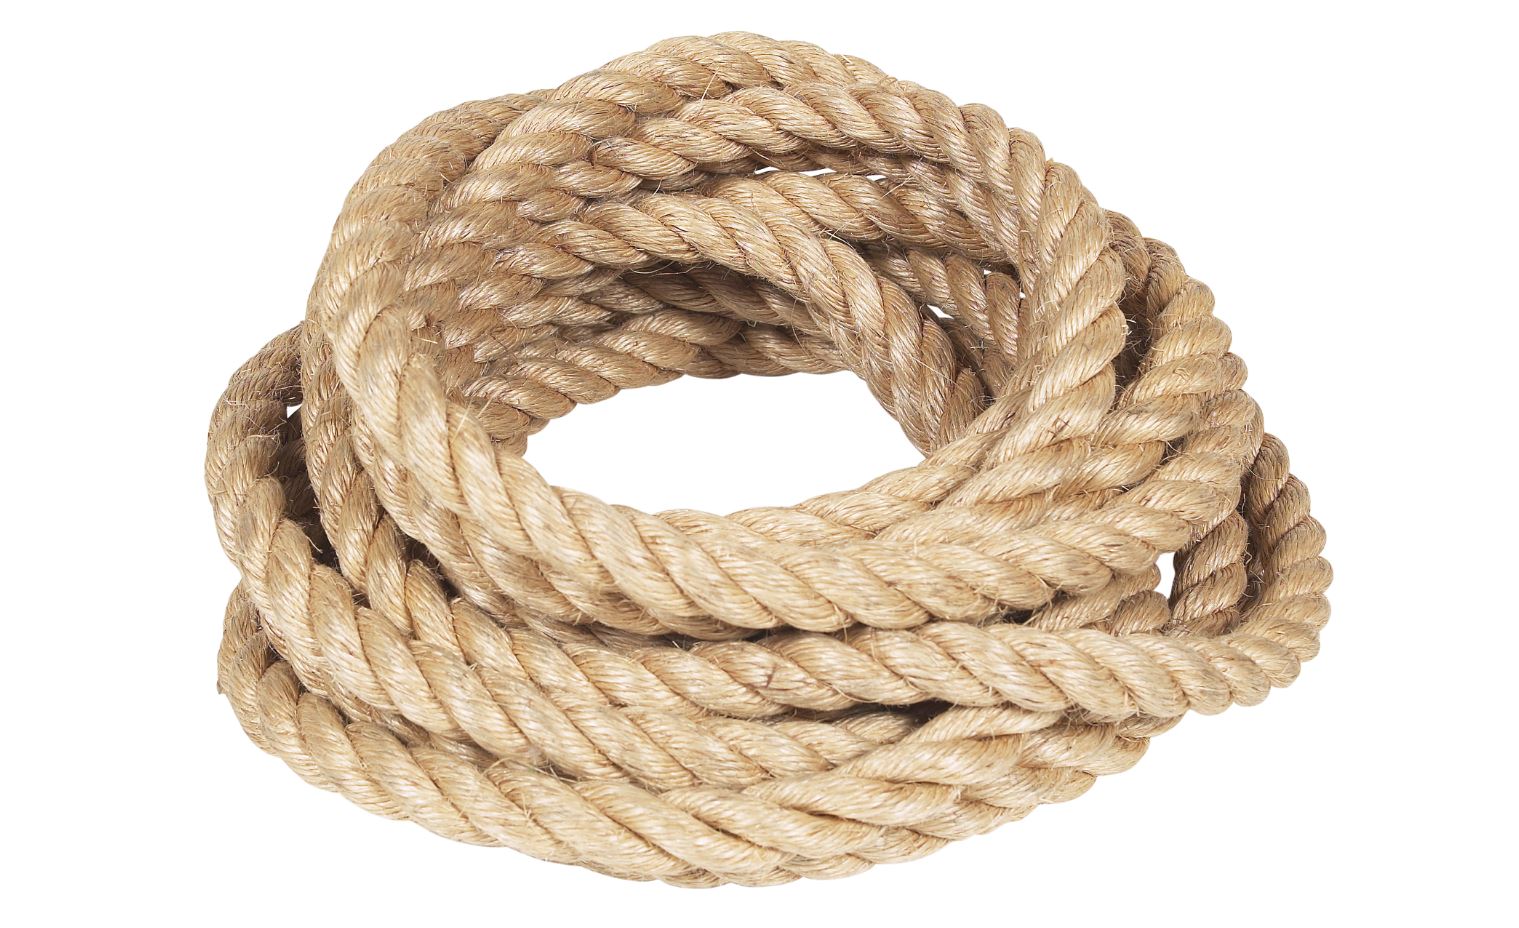 A neatly coiled length of hempen rope [Photo Credit: Vignette1]